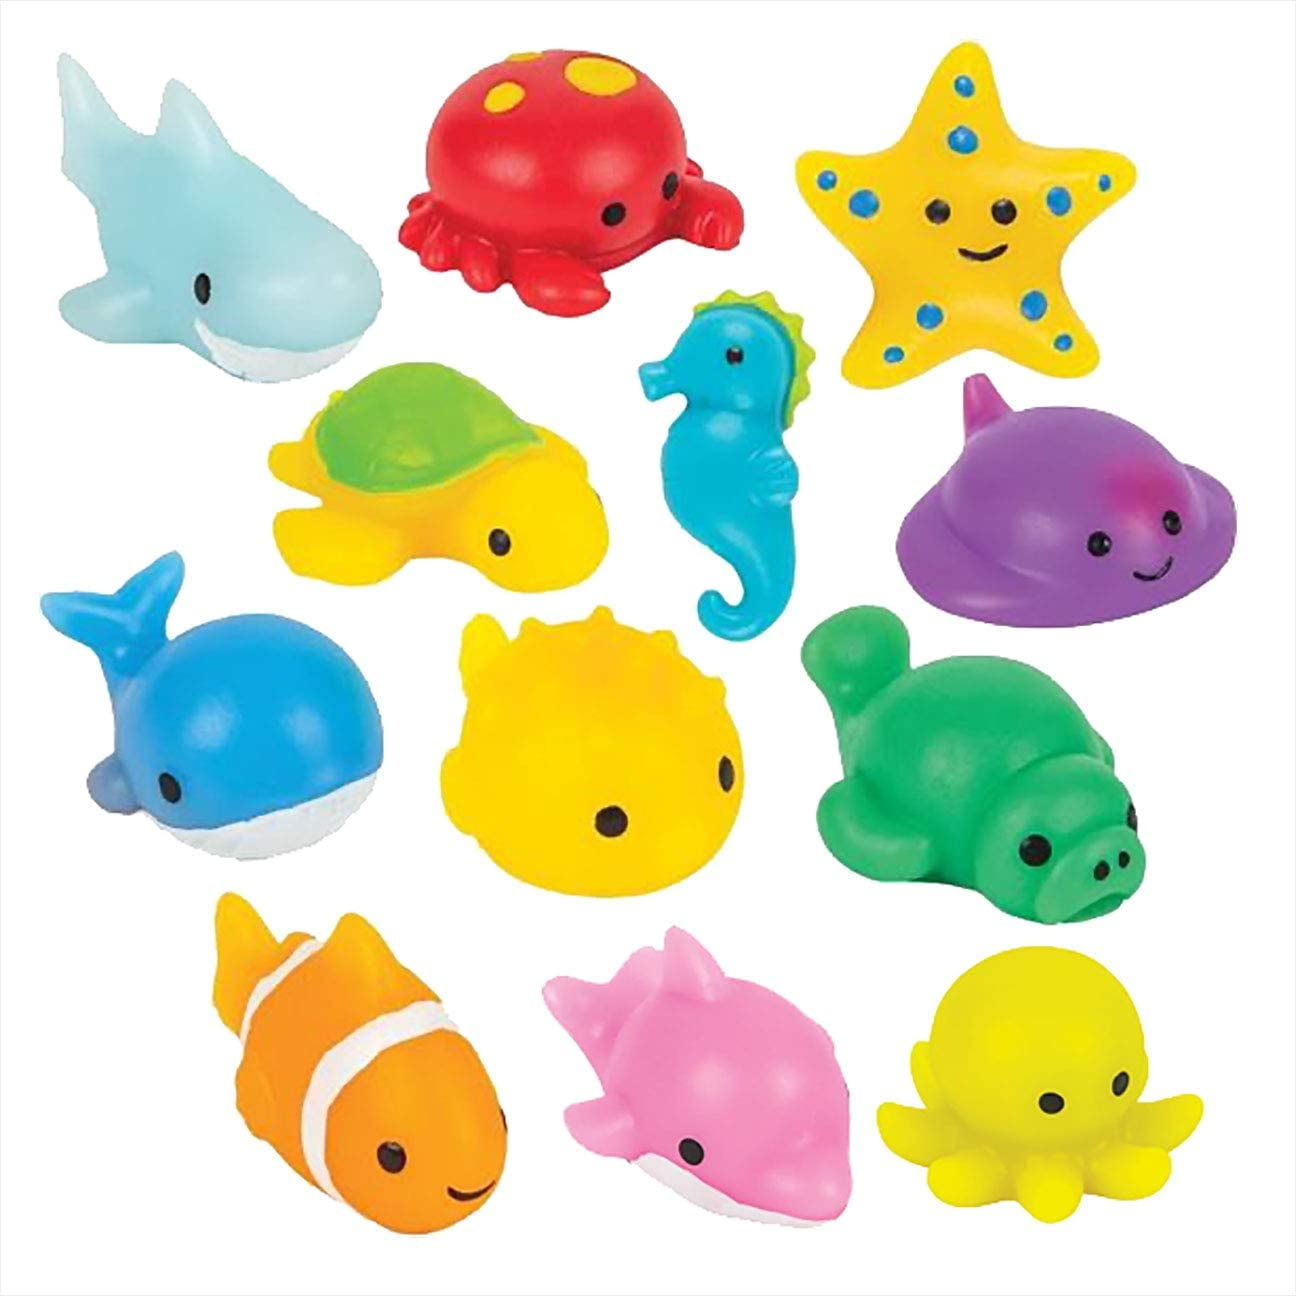 Curious Minds Busy Mochi Squishy Sea Animal Novelty Toys (12 Pieces ...